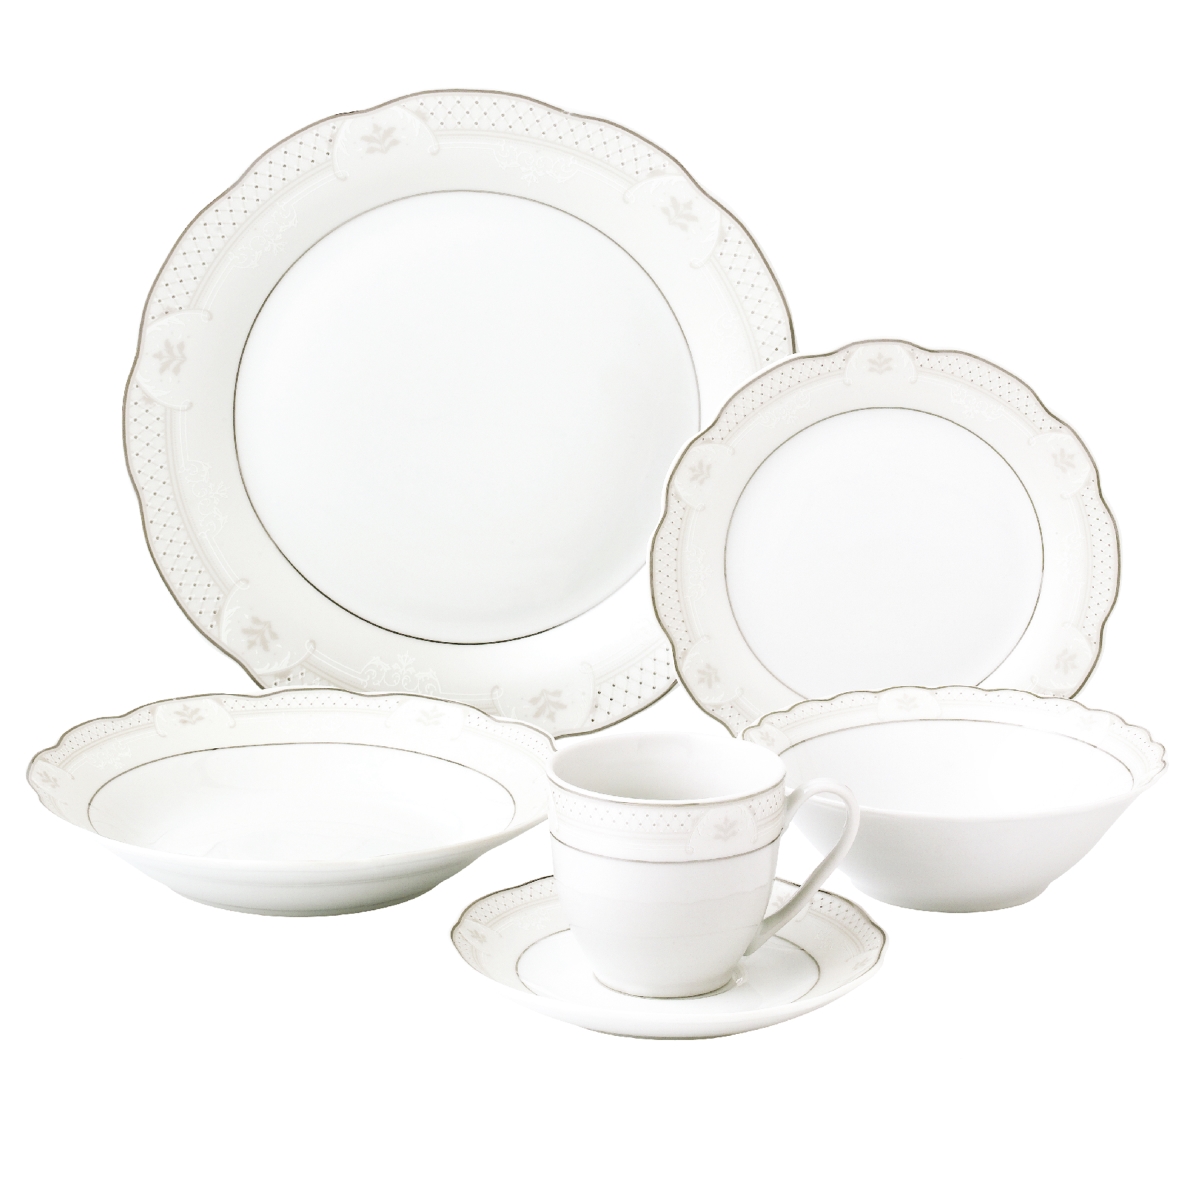 Picture of Lorenzo Import LH435 24 Piece Wavy Dinnerware & Porcelain - Service for 4 - Atara